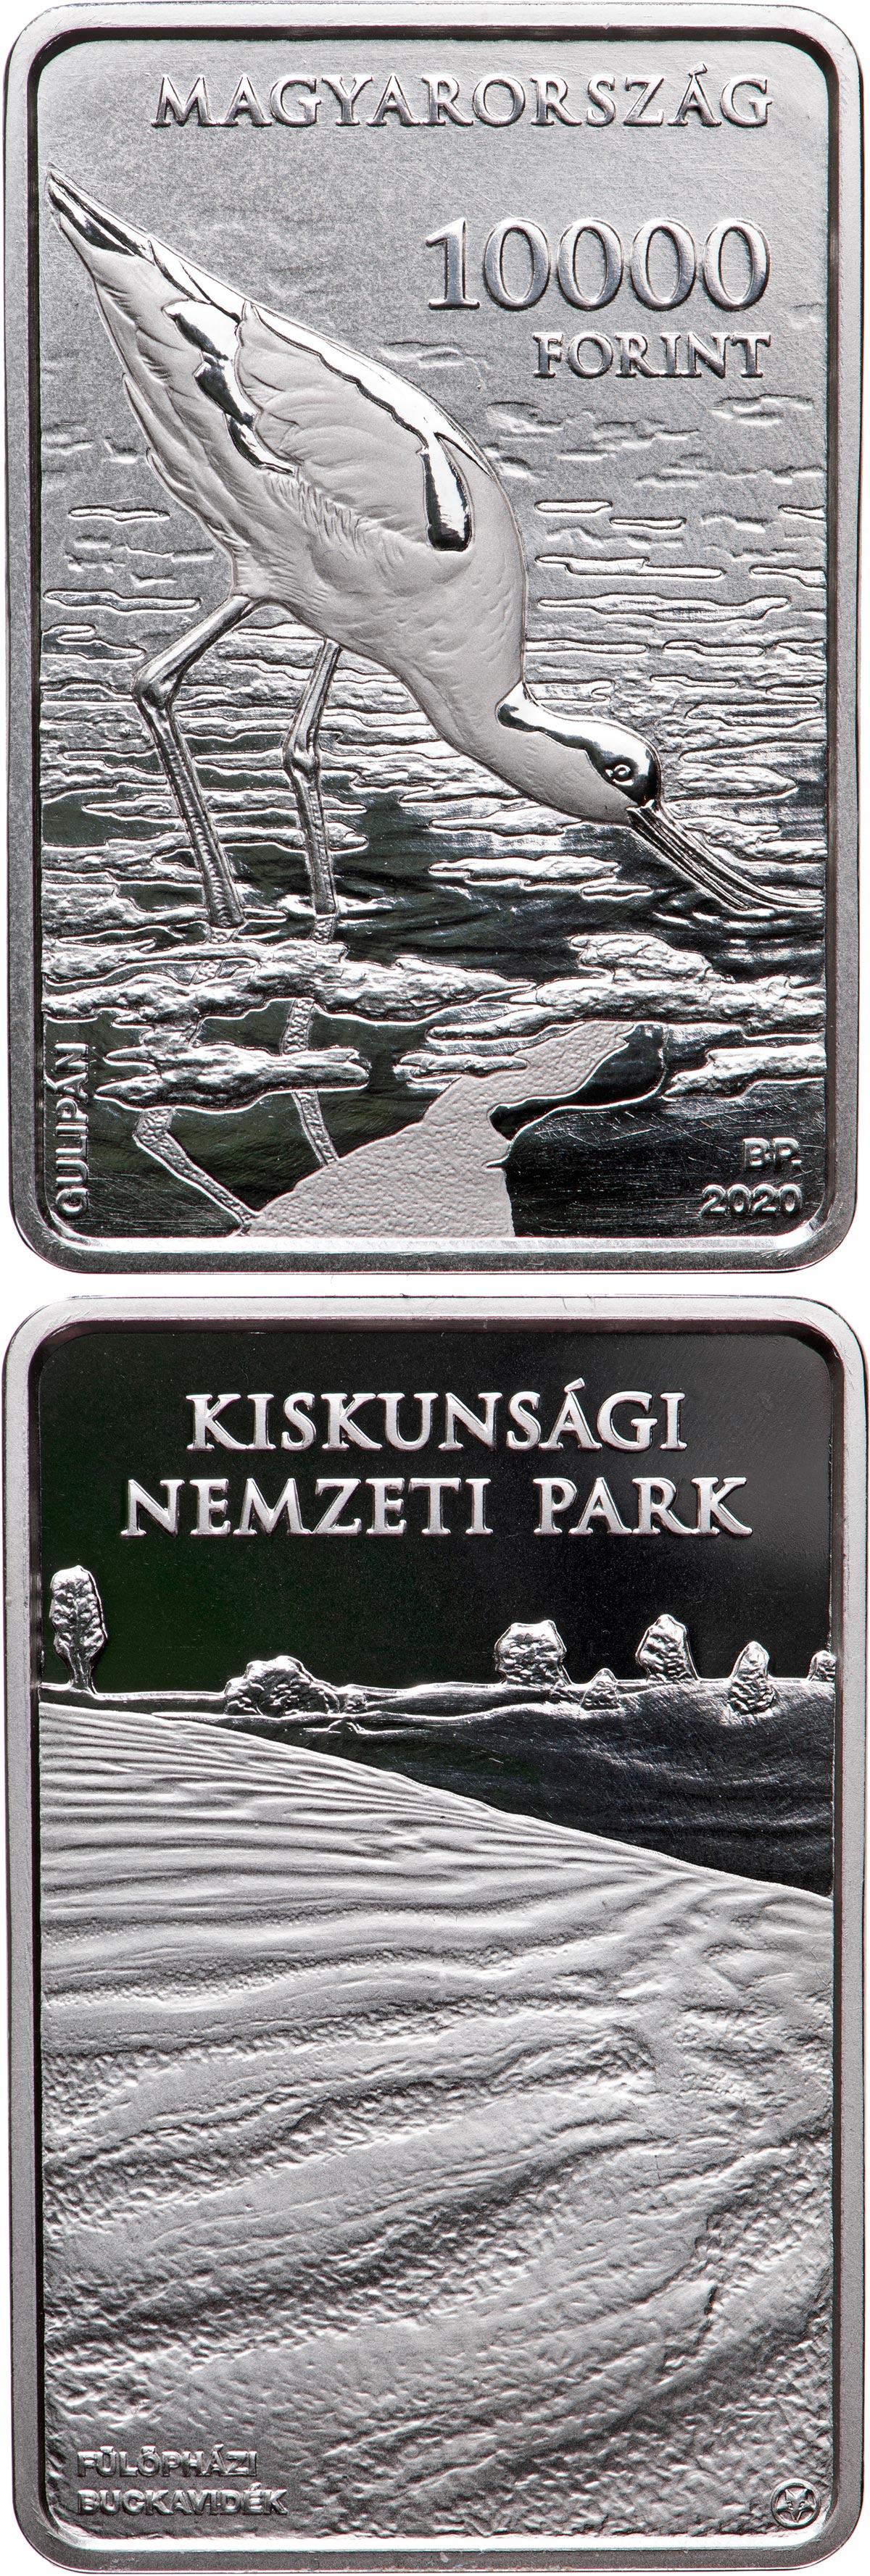 Image of 10000 forint coin - The Kiskunság National Park | Hungary 2020.  The Silver coin is of Proof quality.